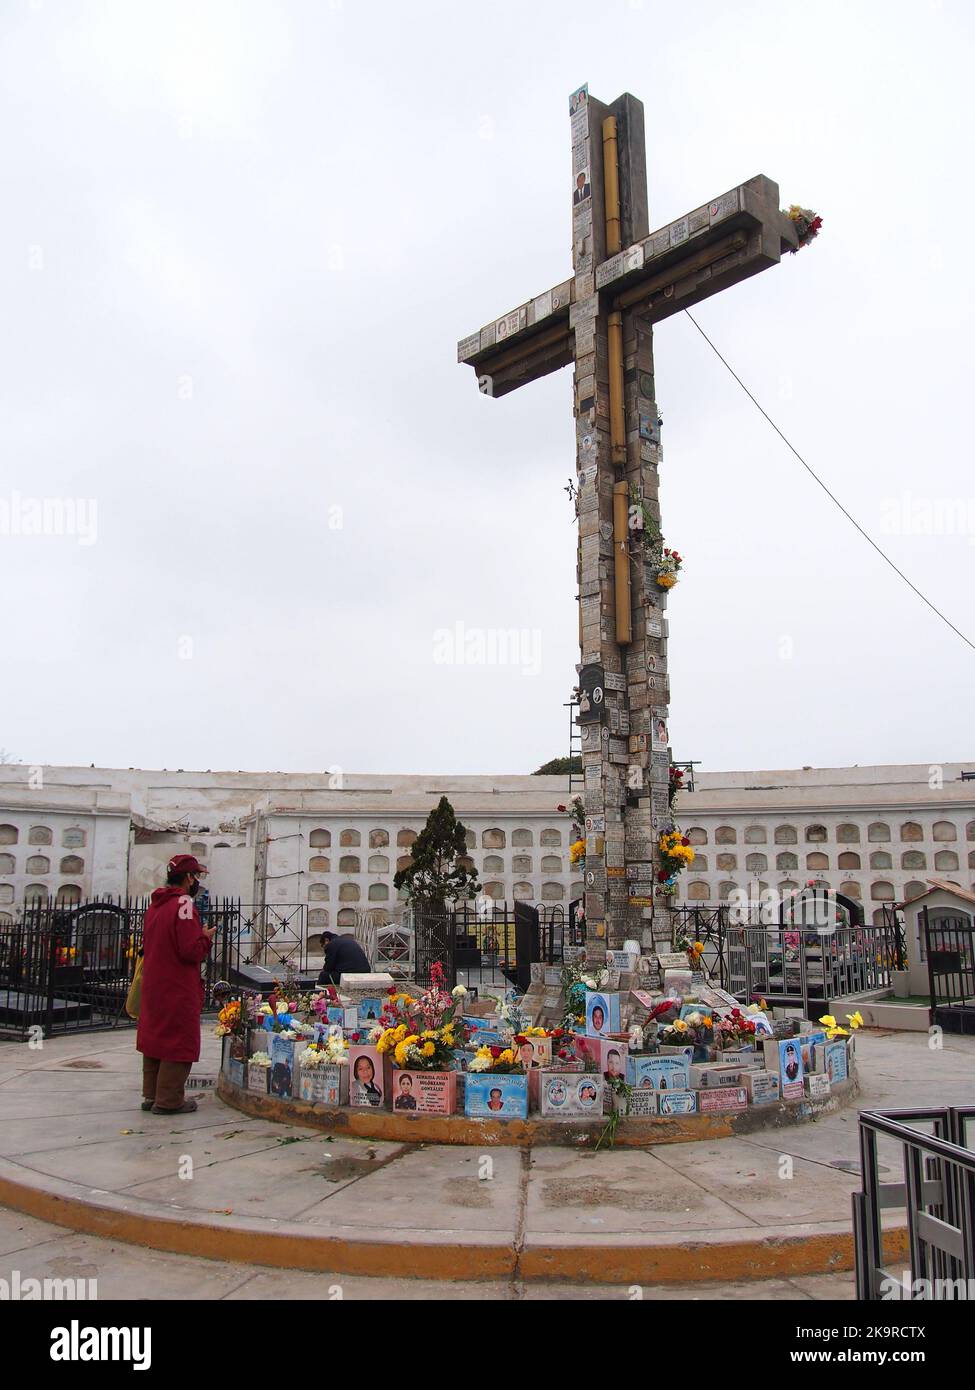 El Callao, Peru. 29th Oct, 2022. Flowers and gifts left for those who do not have a grave at the 'Cross of the Dead' in the Baquijano and Carrillo cemetery at the Peruvian port of El Callao. The Cross of the Dead was erected on an old mass grave and is the place where people come to honor their deceased without a grave, either because they were lost at sea, disappearances, missing in any way, or because their bodies were thrown into a mass grave. Credit: Fotoholica Press Agency/Alamy Live News Stock Photo